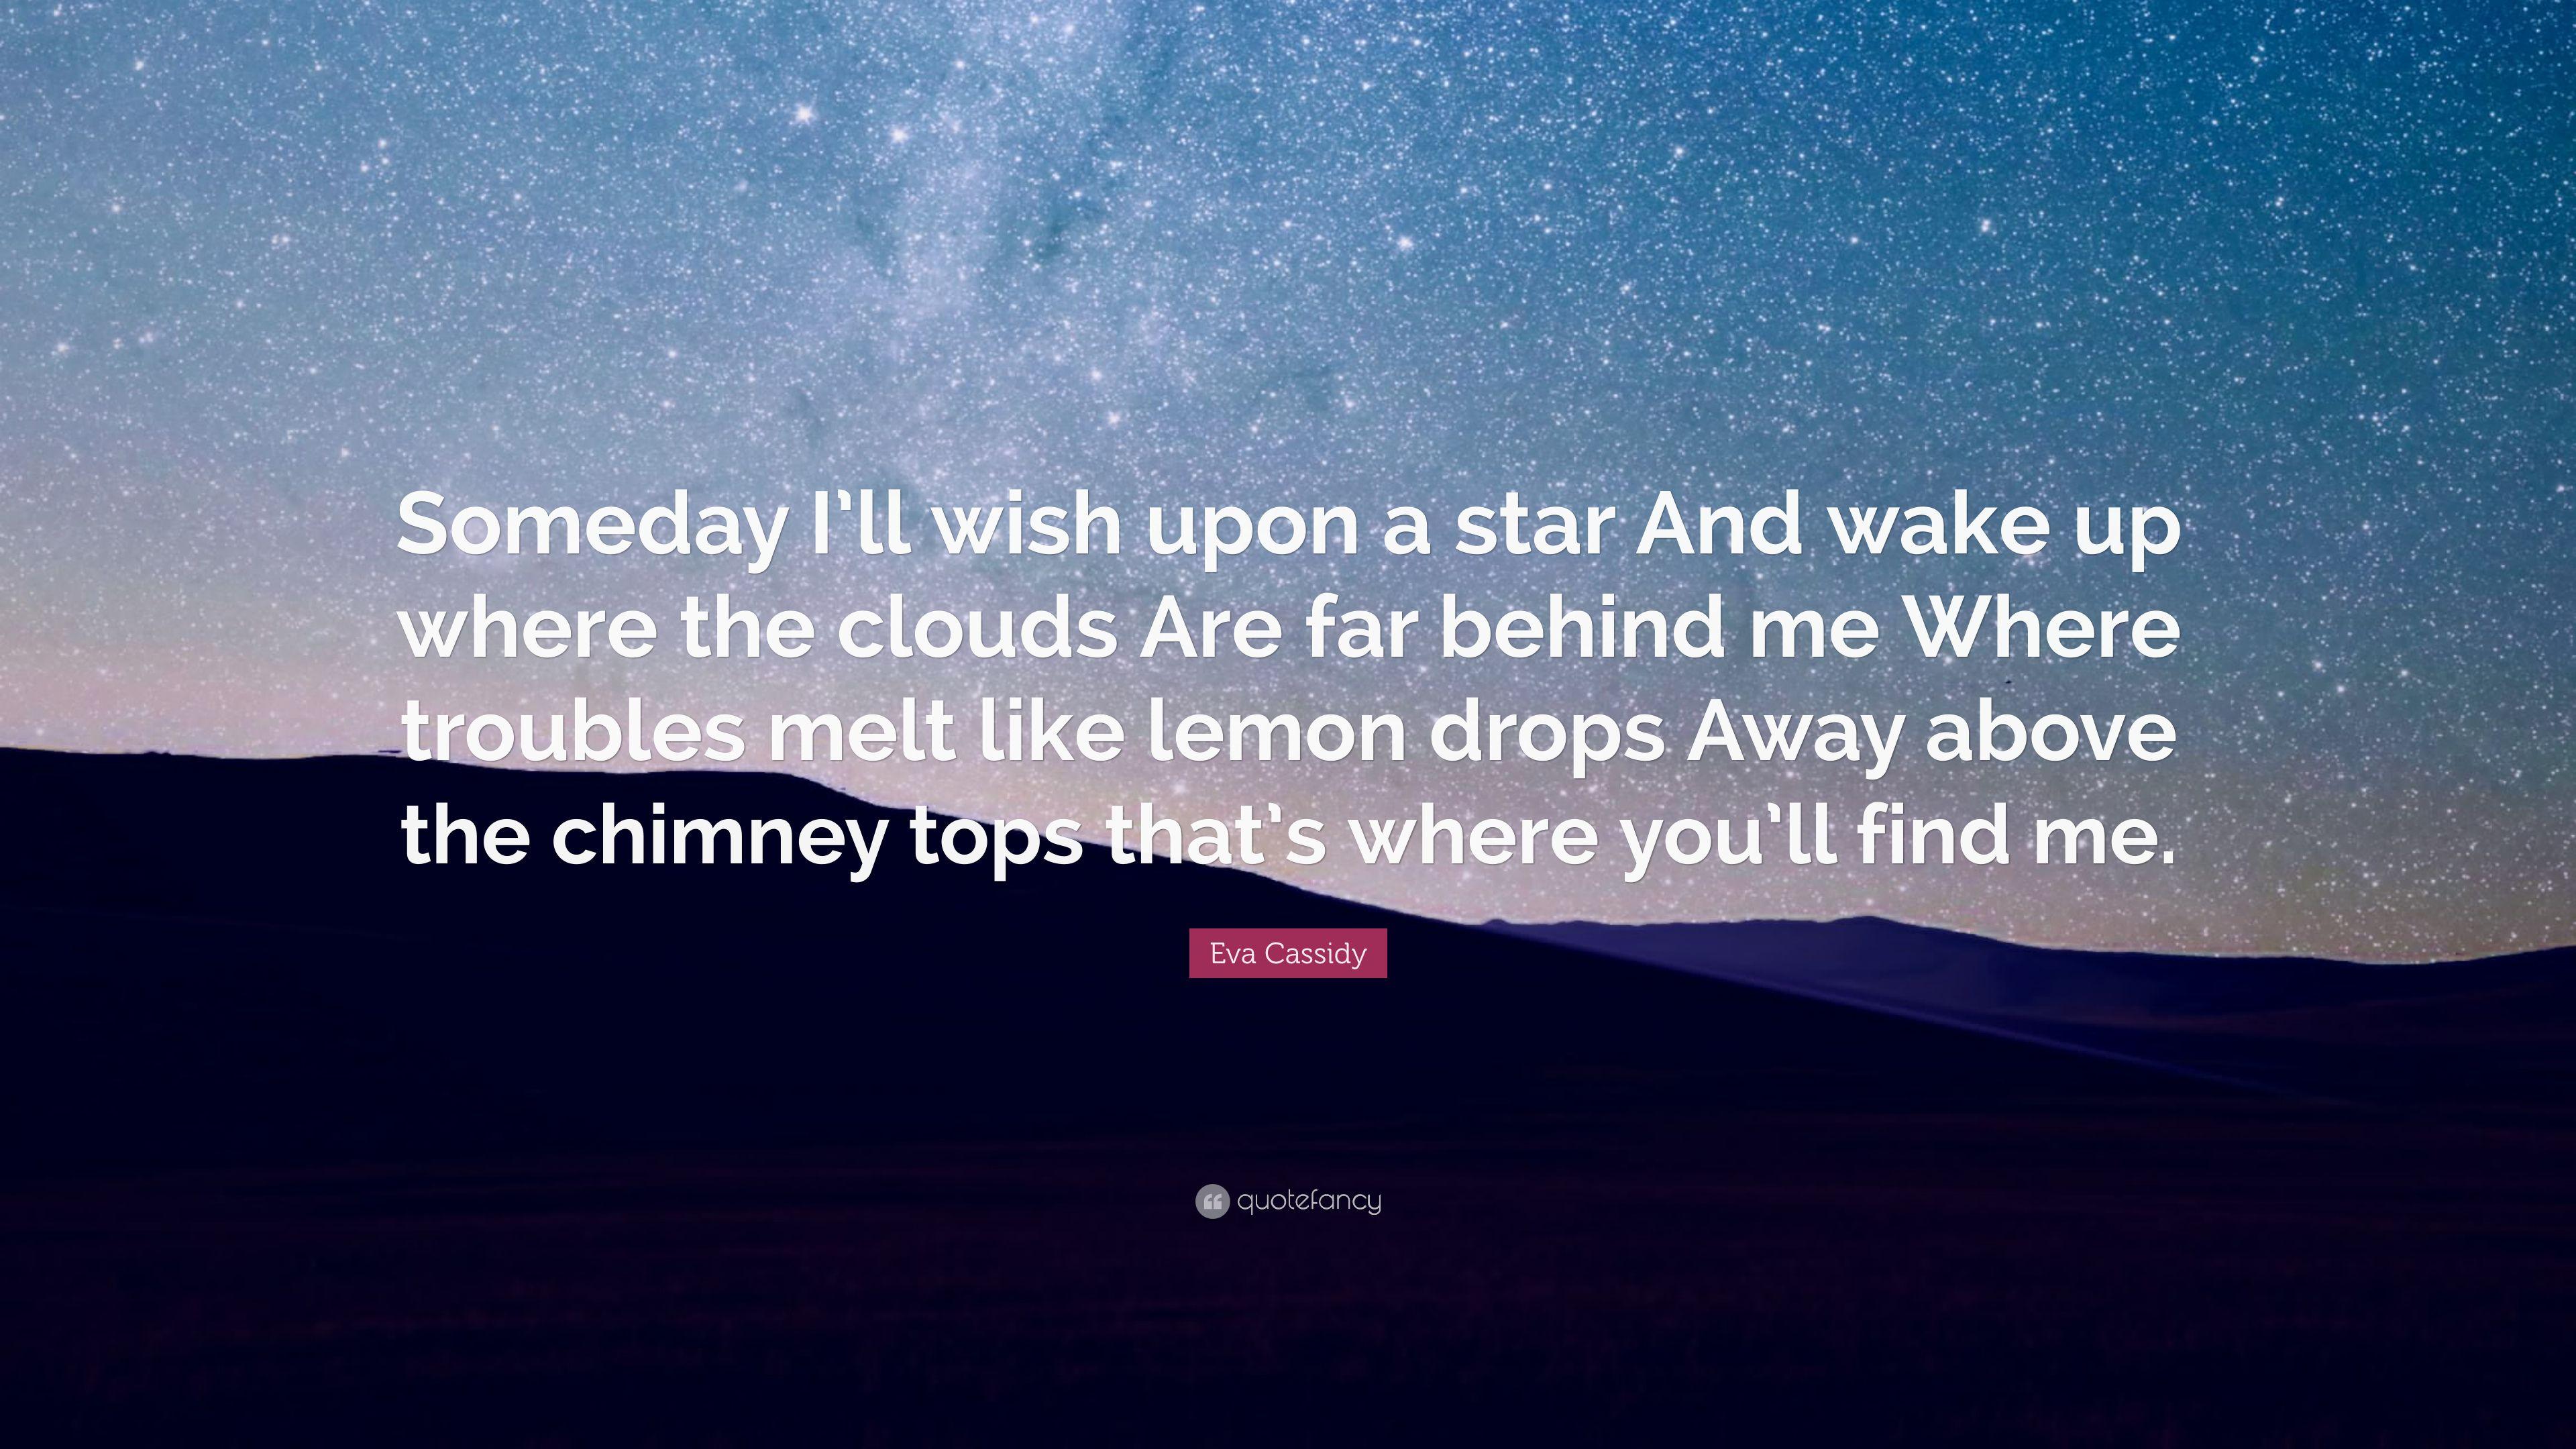 Eva Cassidy Quote: “Someday I'll wish upon a star And wake up where